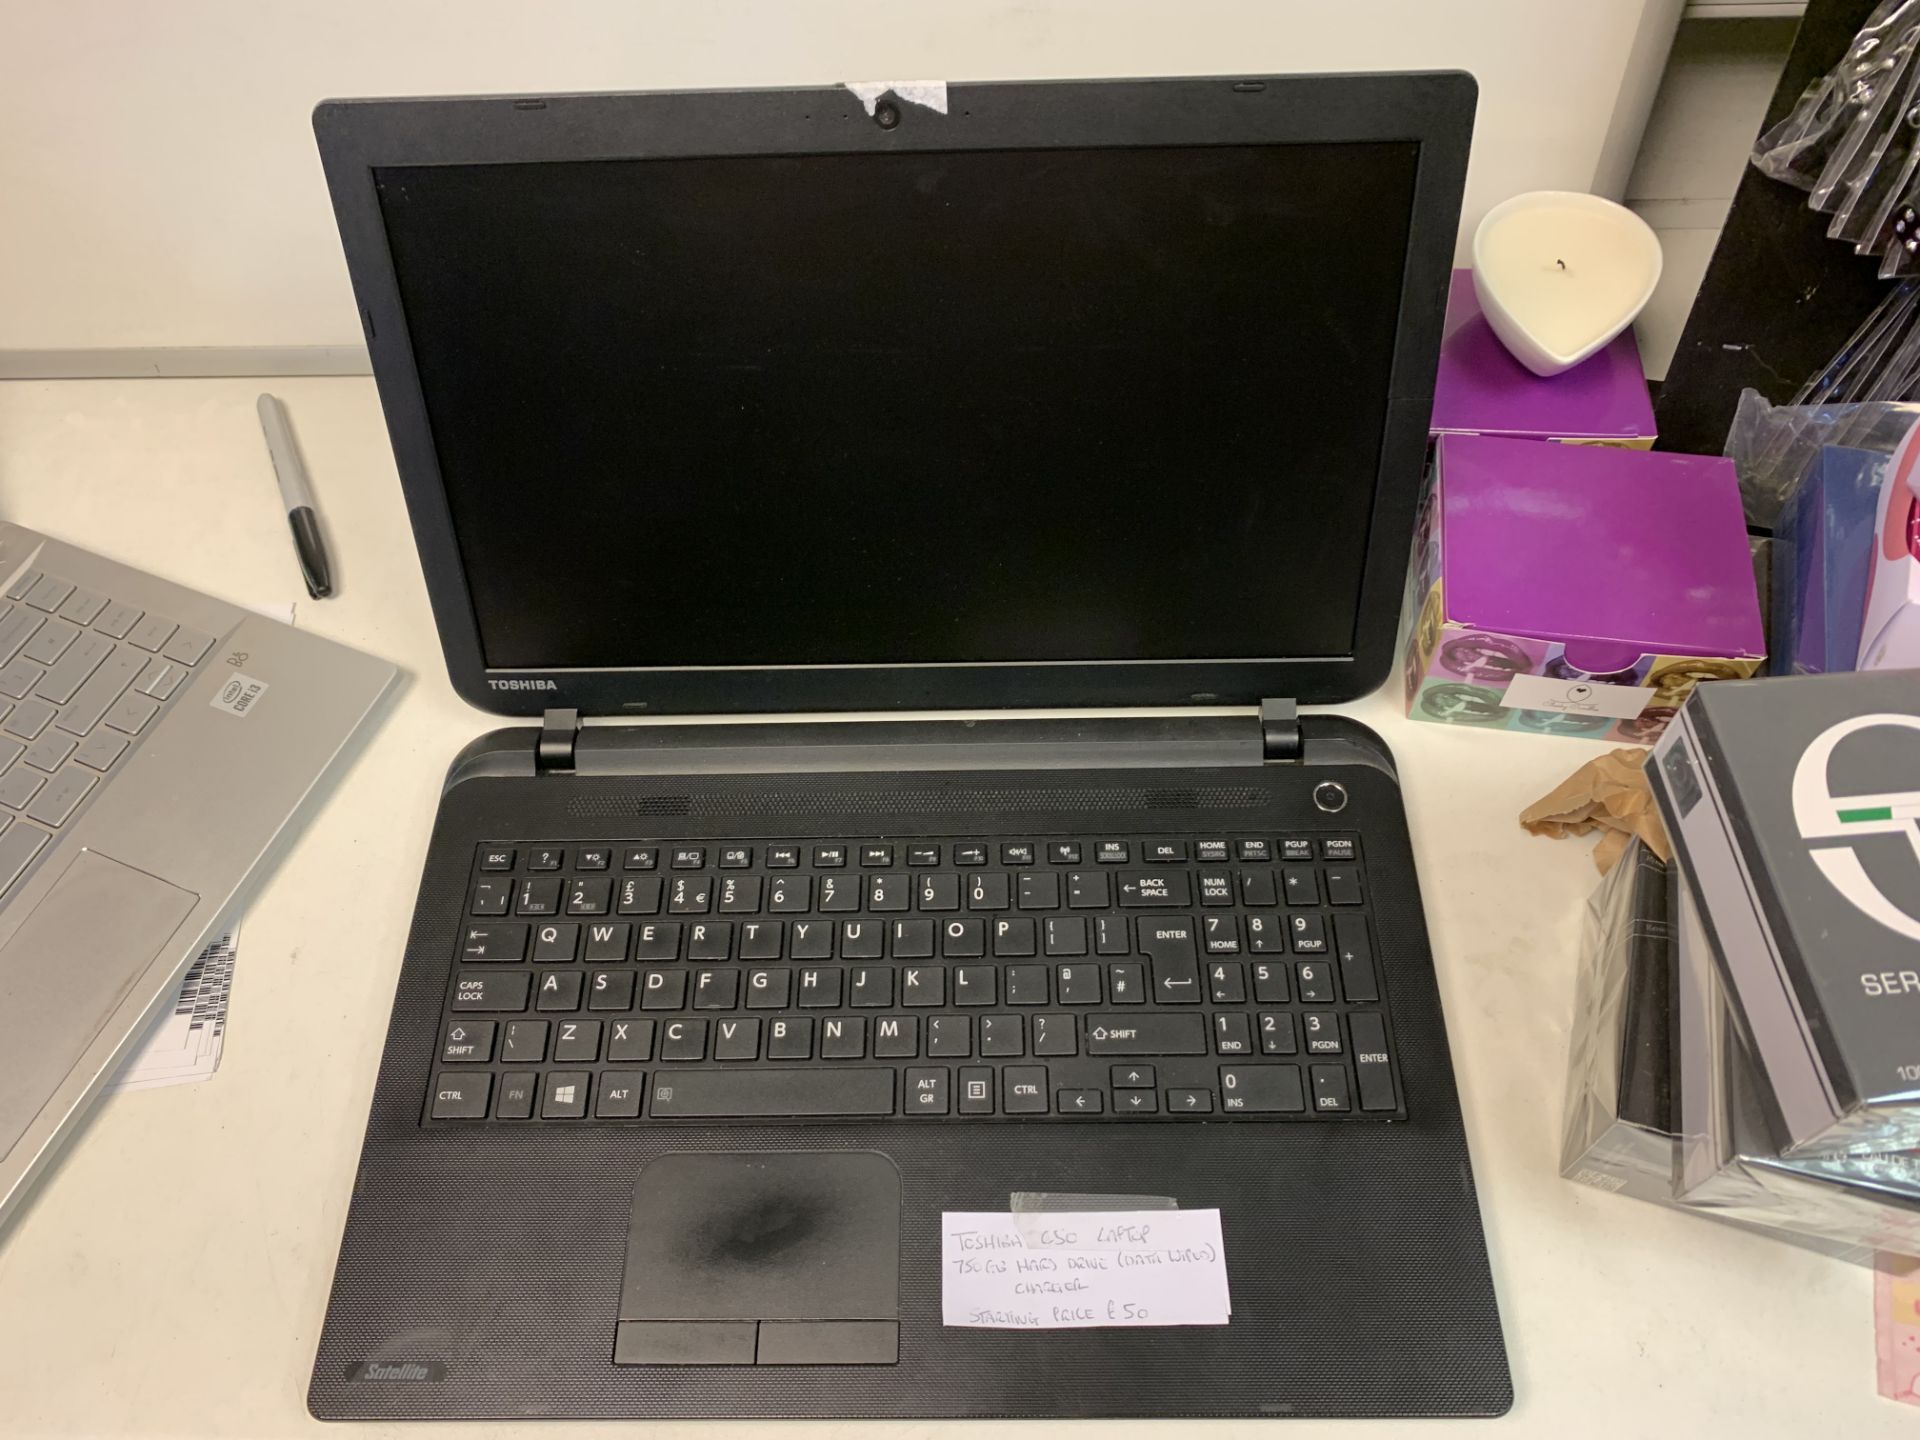 TOSHIBA C50 LAPTOP, 750GB HARD DRIVE ( DATA WIPED ) WITH CHARGER (41)